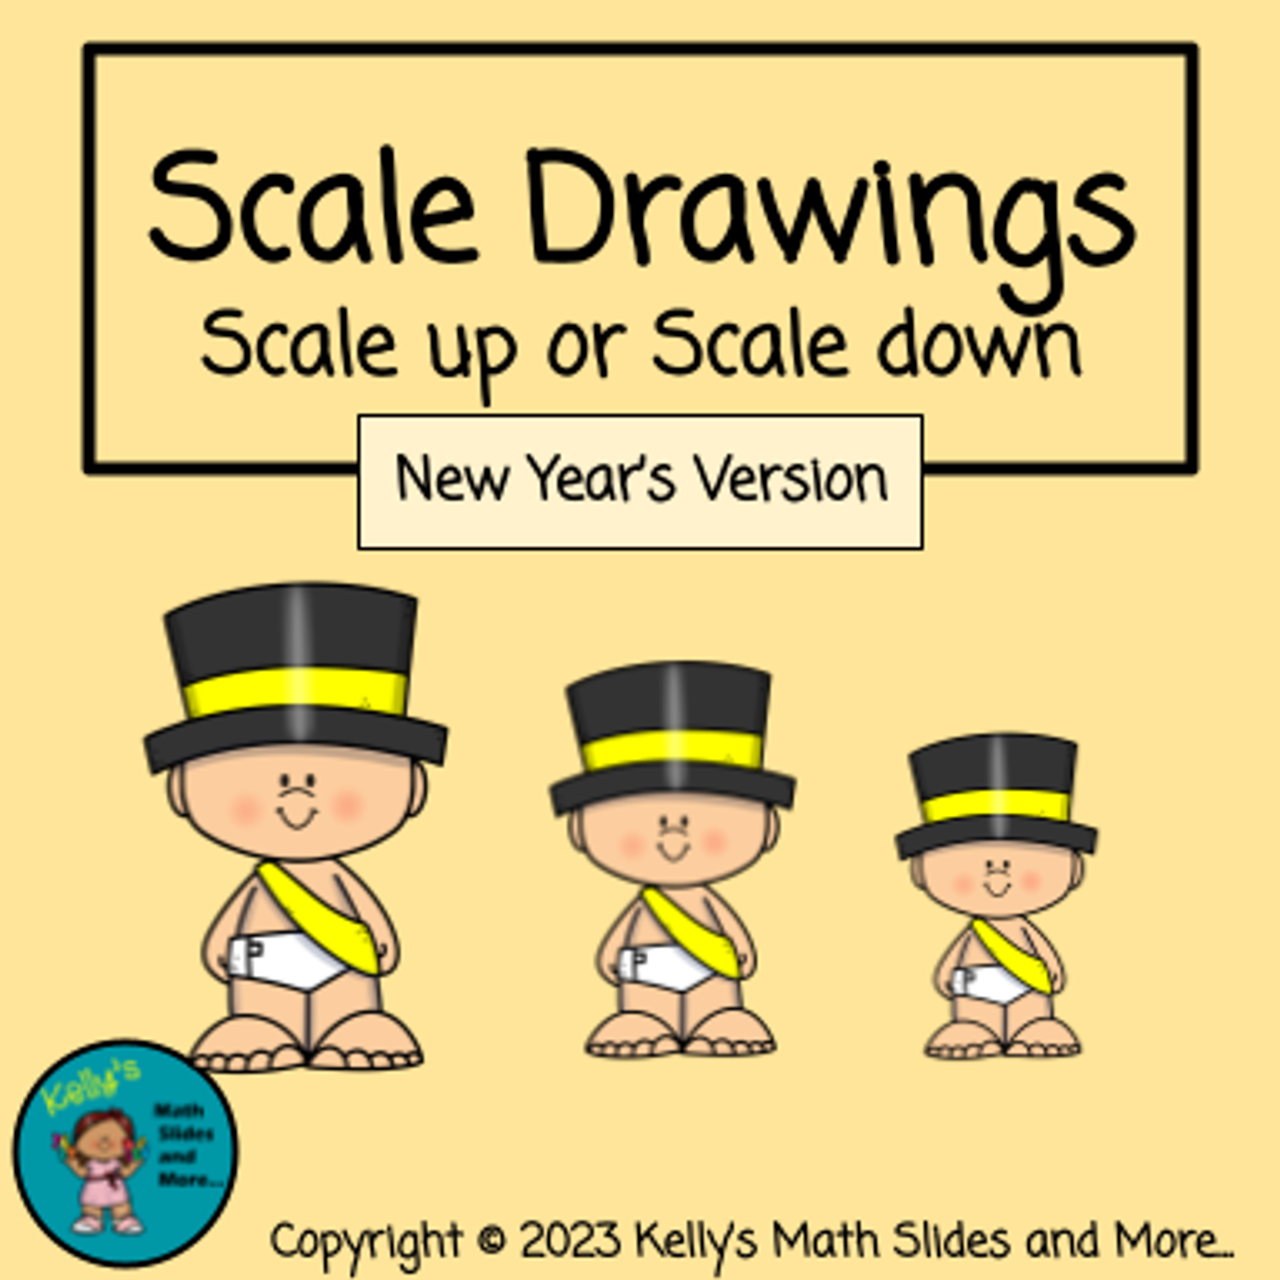 New Year's Scale Drawings